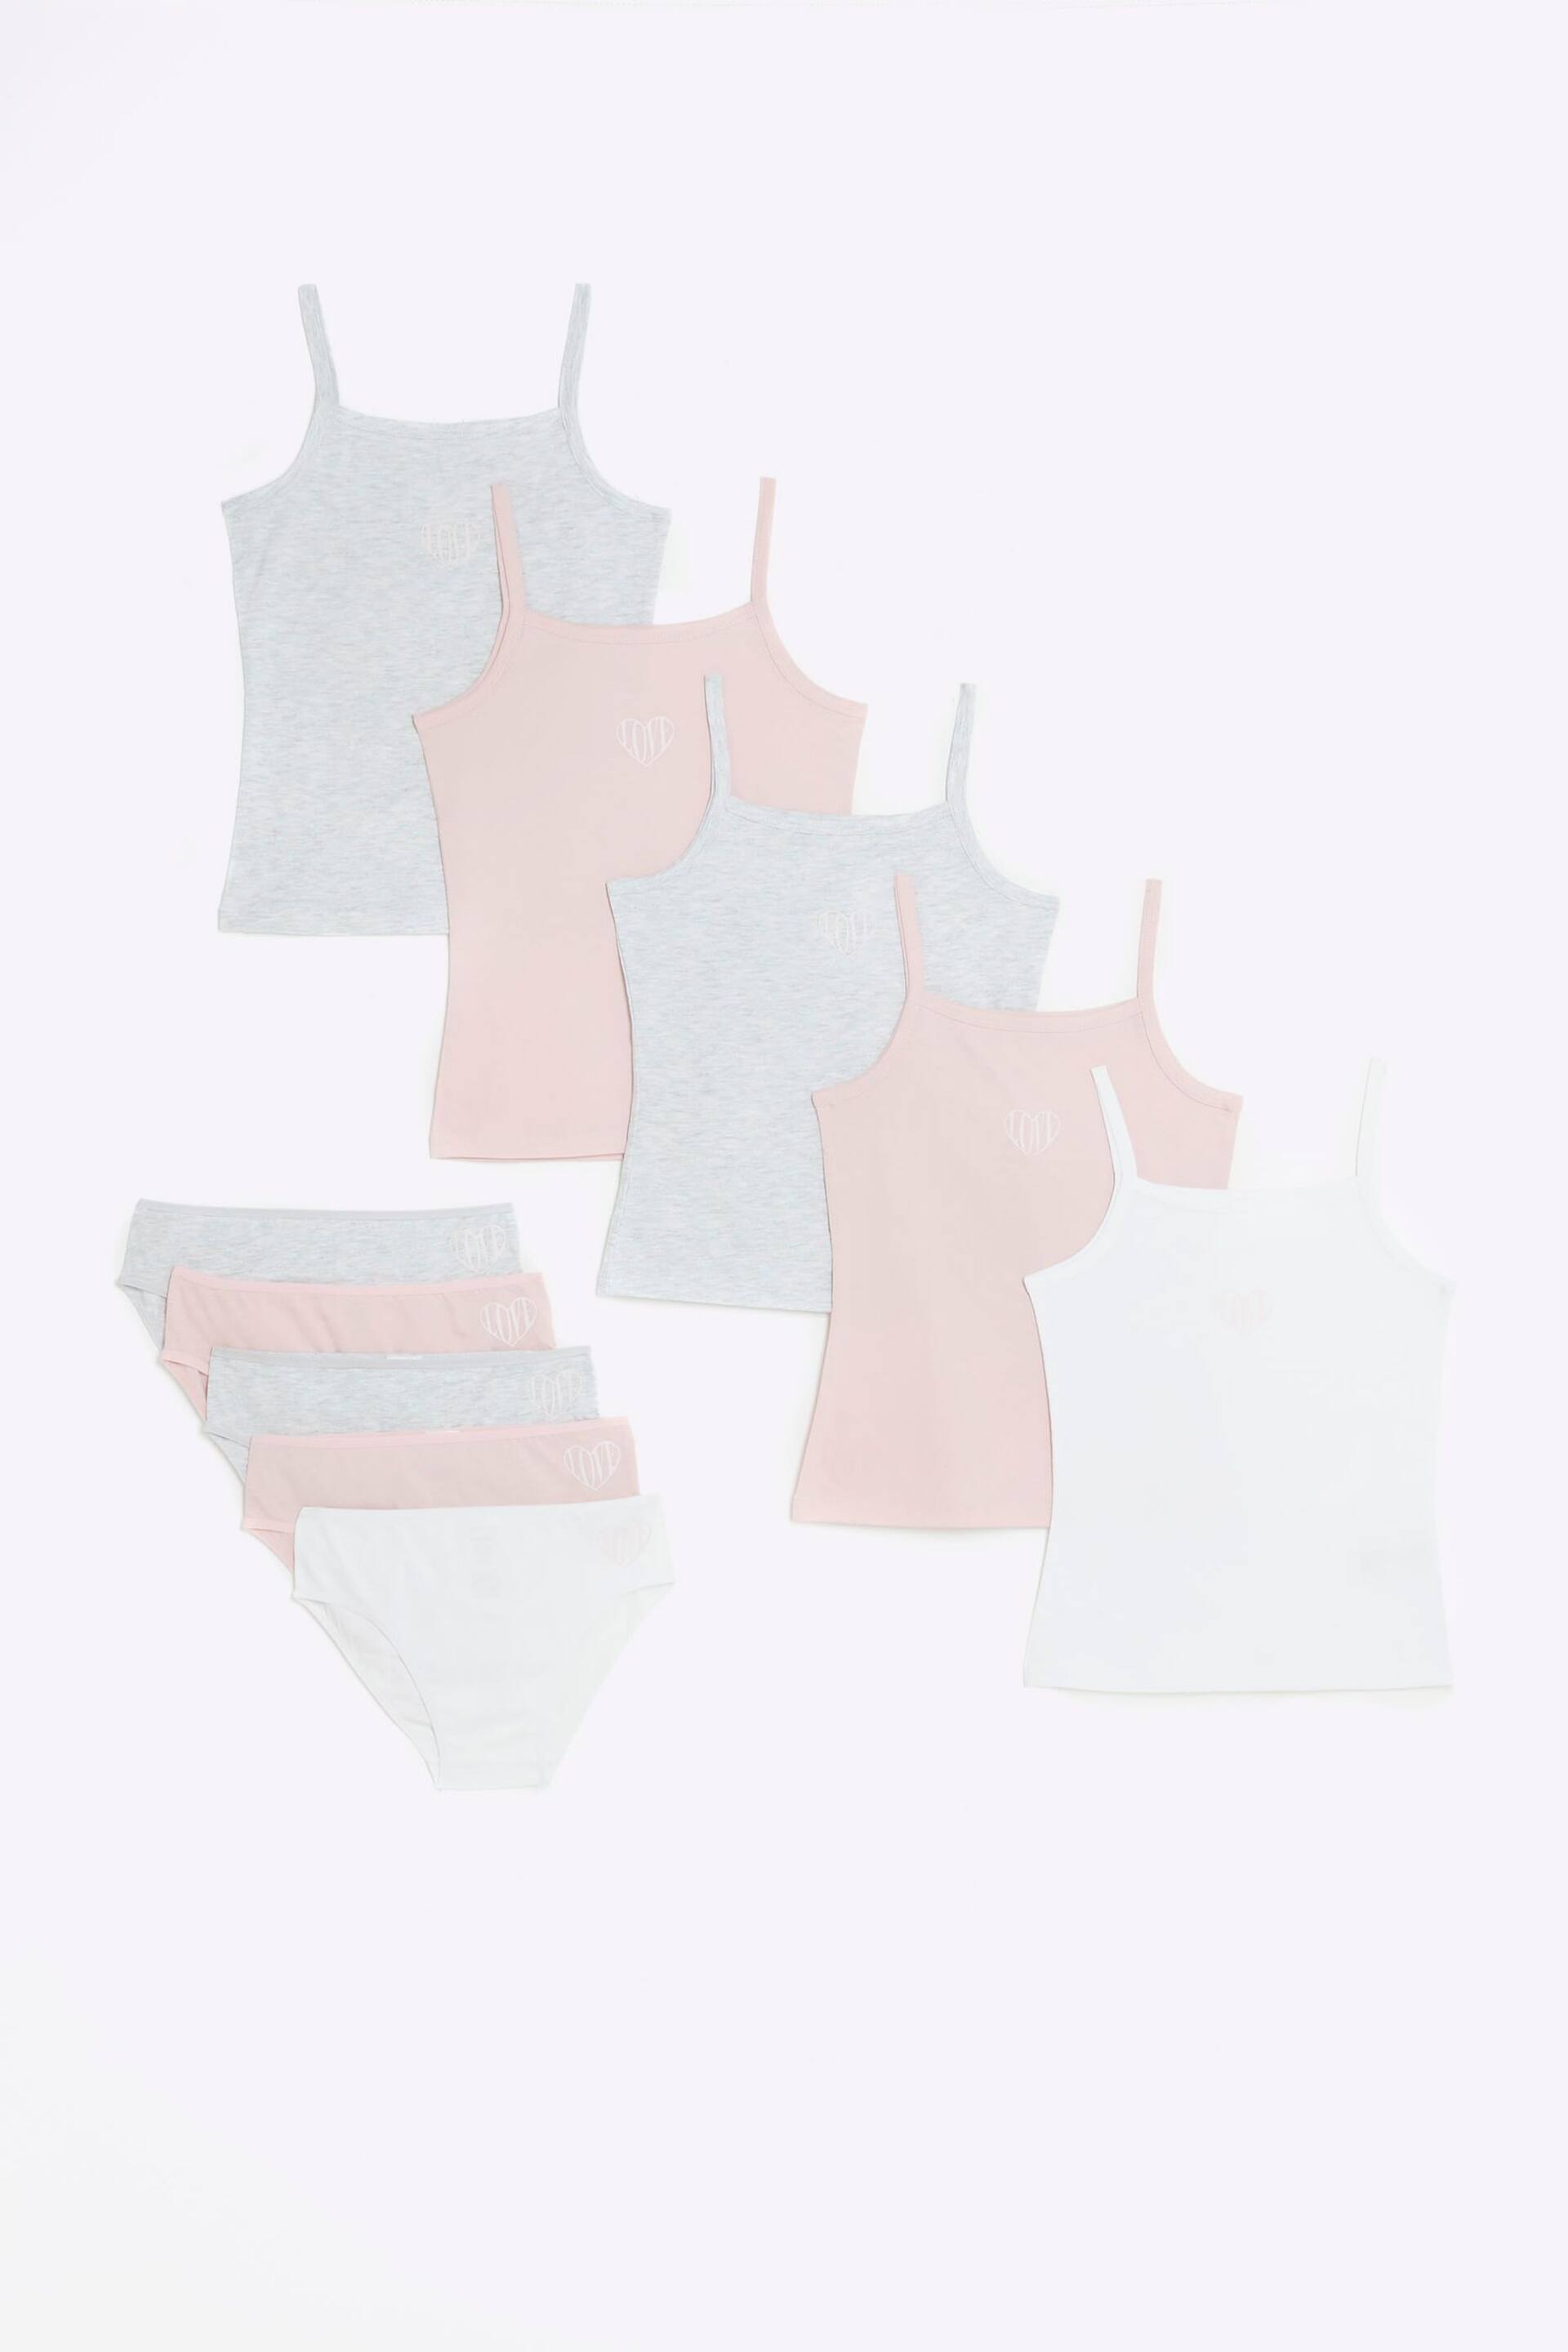 River Island Pink Girls Vests And Briefs 10 Piece Set - Image 1 of 3